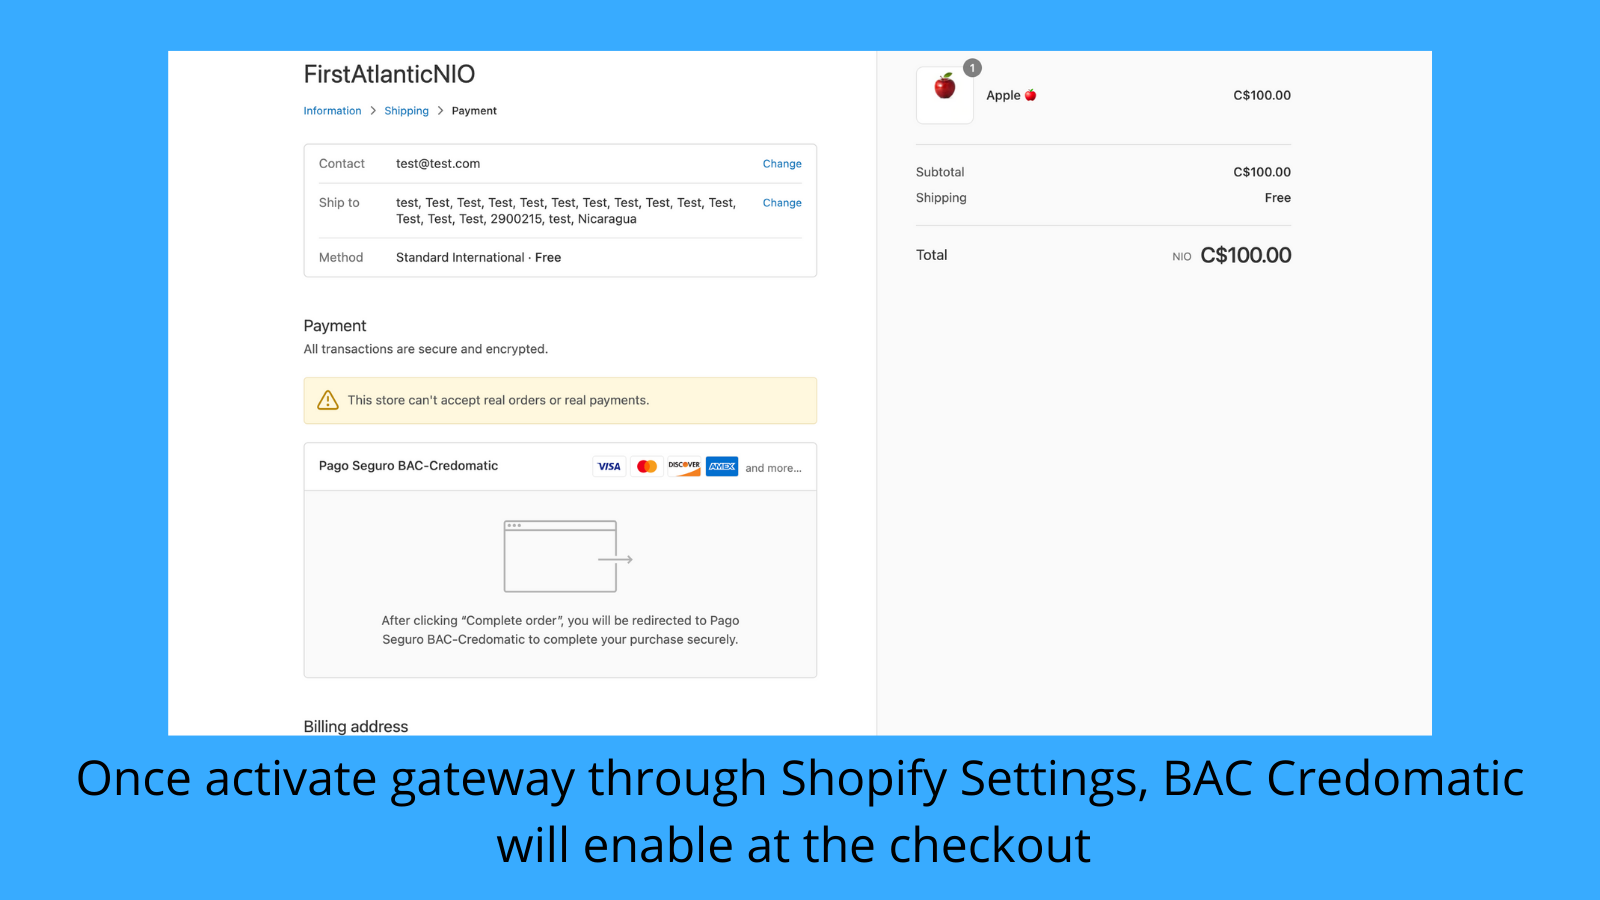 Activate on Shopify settings to enable gateway at checkout.